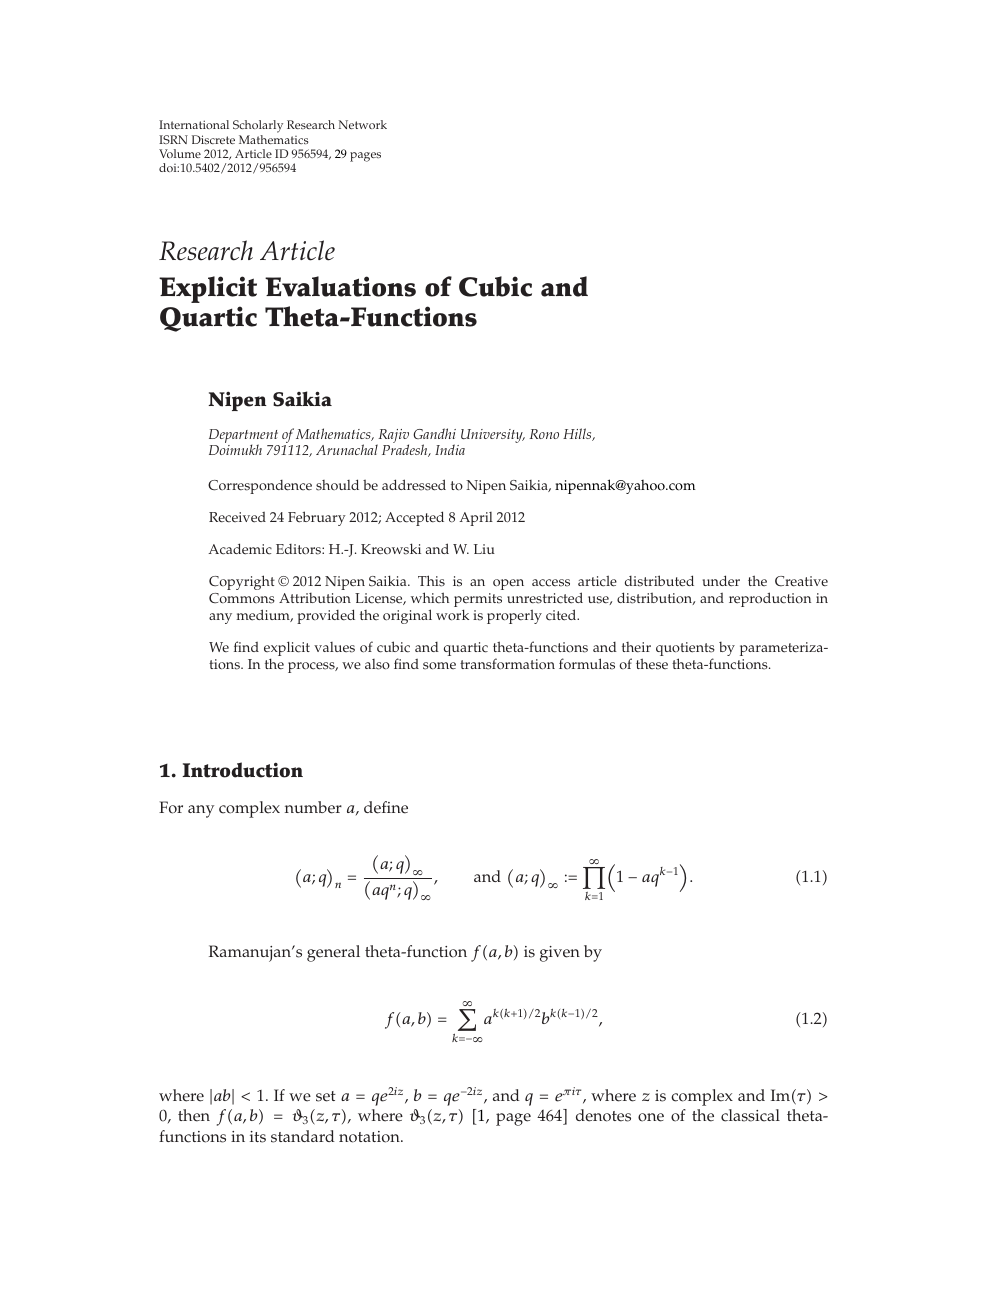 Explicit Evaluations Of Cubic And Quartic Theta Functions Topic Of Research Paper In Mathematics Download Scholarly Article Pdf And Read For Free On Cyberleninka Open Science Hub